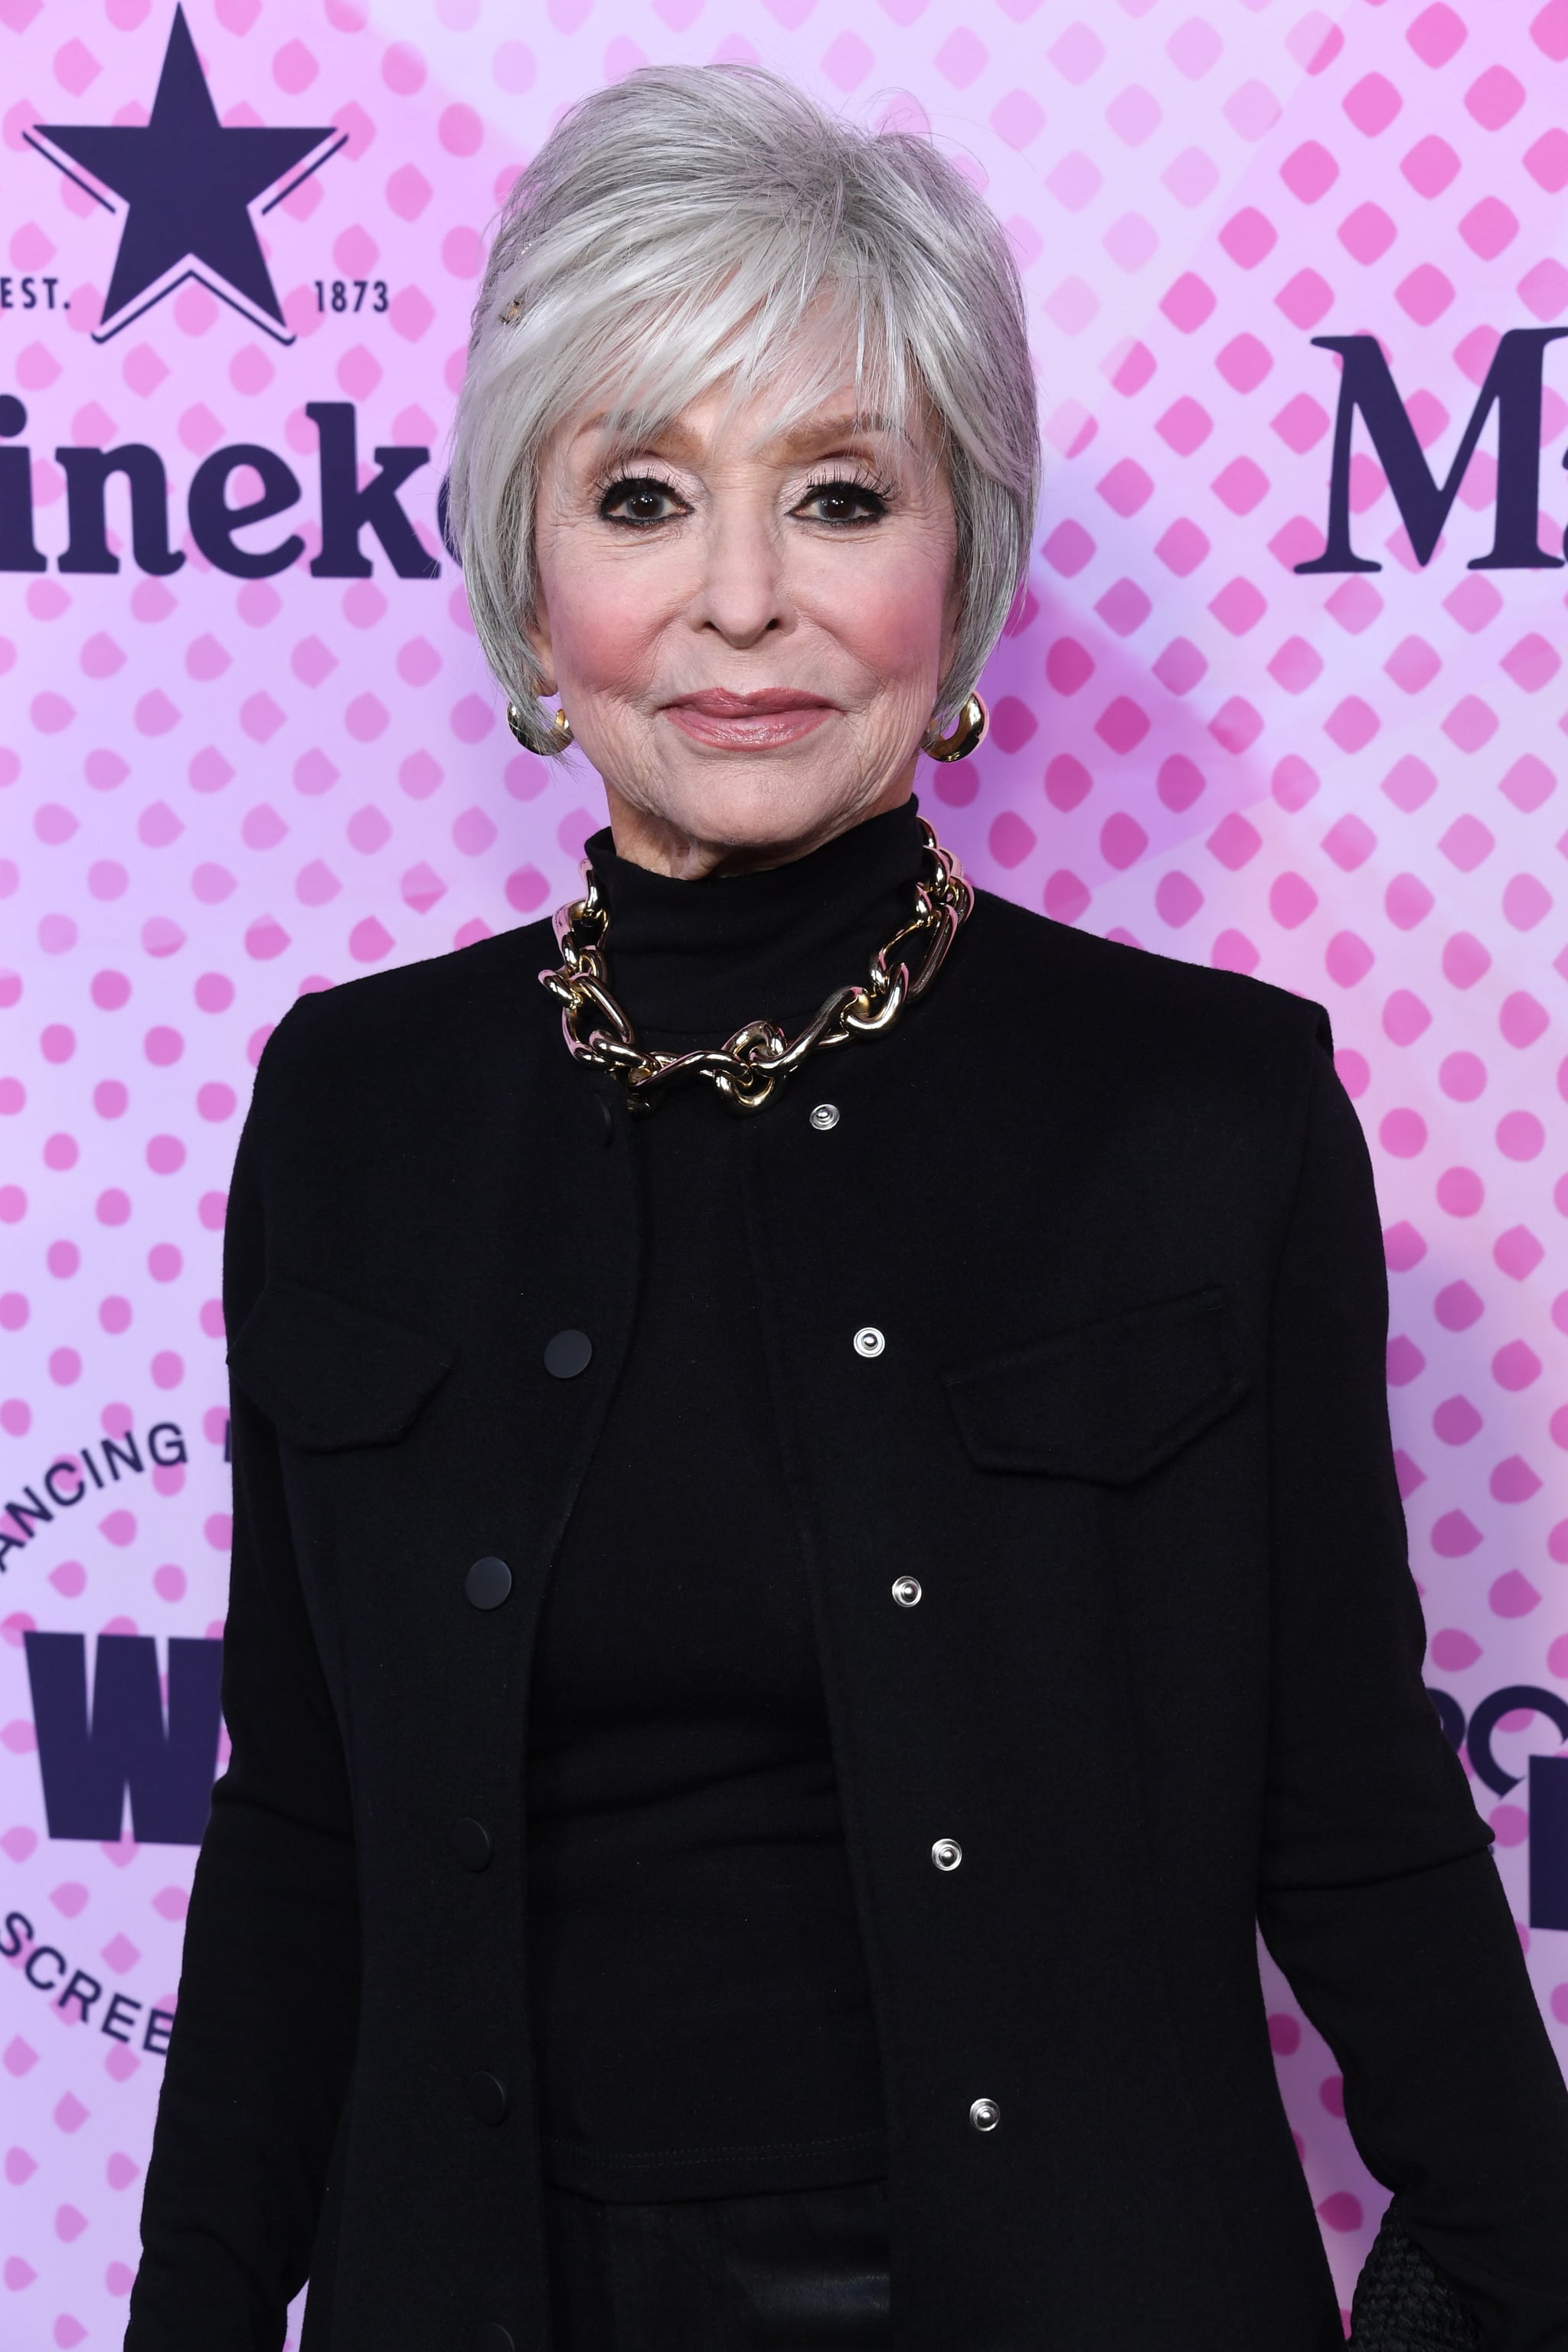 LOS ANGELES, CALIFORNIA - MARCH 25: Rita Moreno attends the 15th Annual WIF Oscar Party Celebrating The 2022 Women Oscar Nominees on March 25, 2022 in Los Angeles, California. (Photo by Jon Kopaloff/Getty Images)